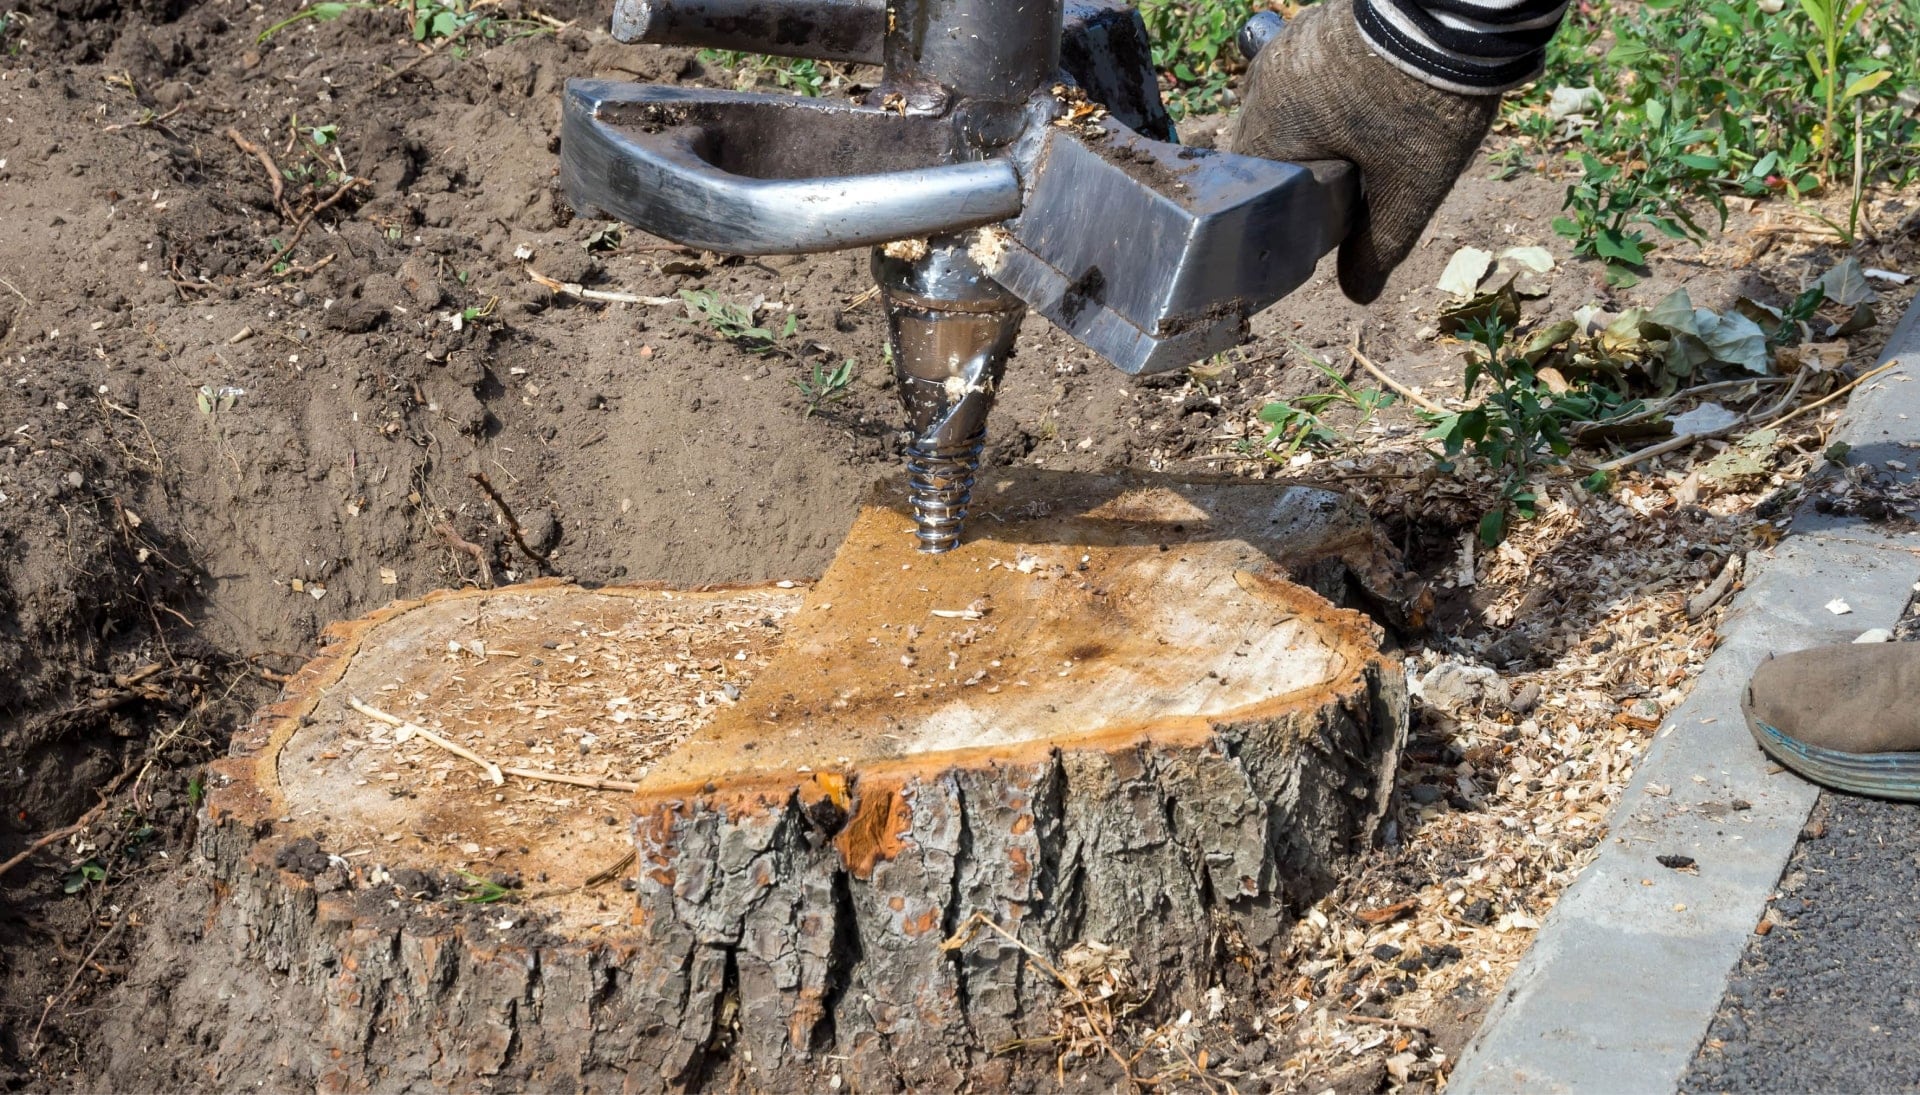 Professional stump removal service in Hendersonville, TN, offering expert and reliable removal of tree stumps from residential and commercial properties. Our skilled arborists use state-of-the-art equipment to safely and efficiently remove tree stumps, leaving your property free of tripping hazards and unsightly stumps.